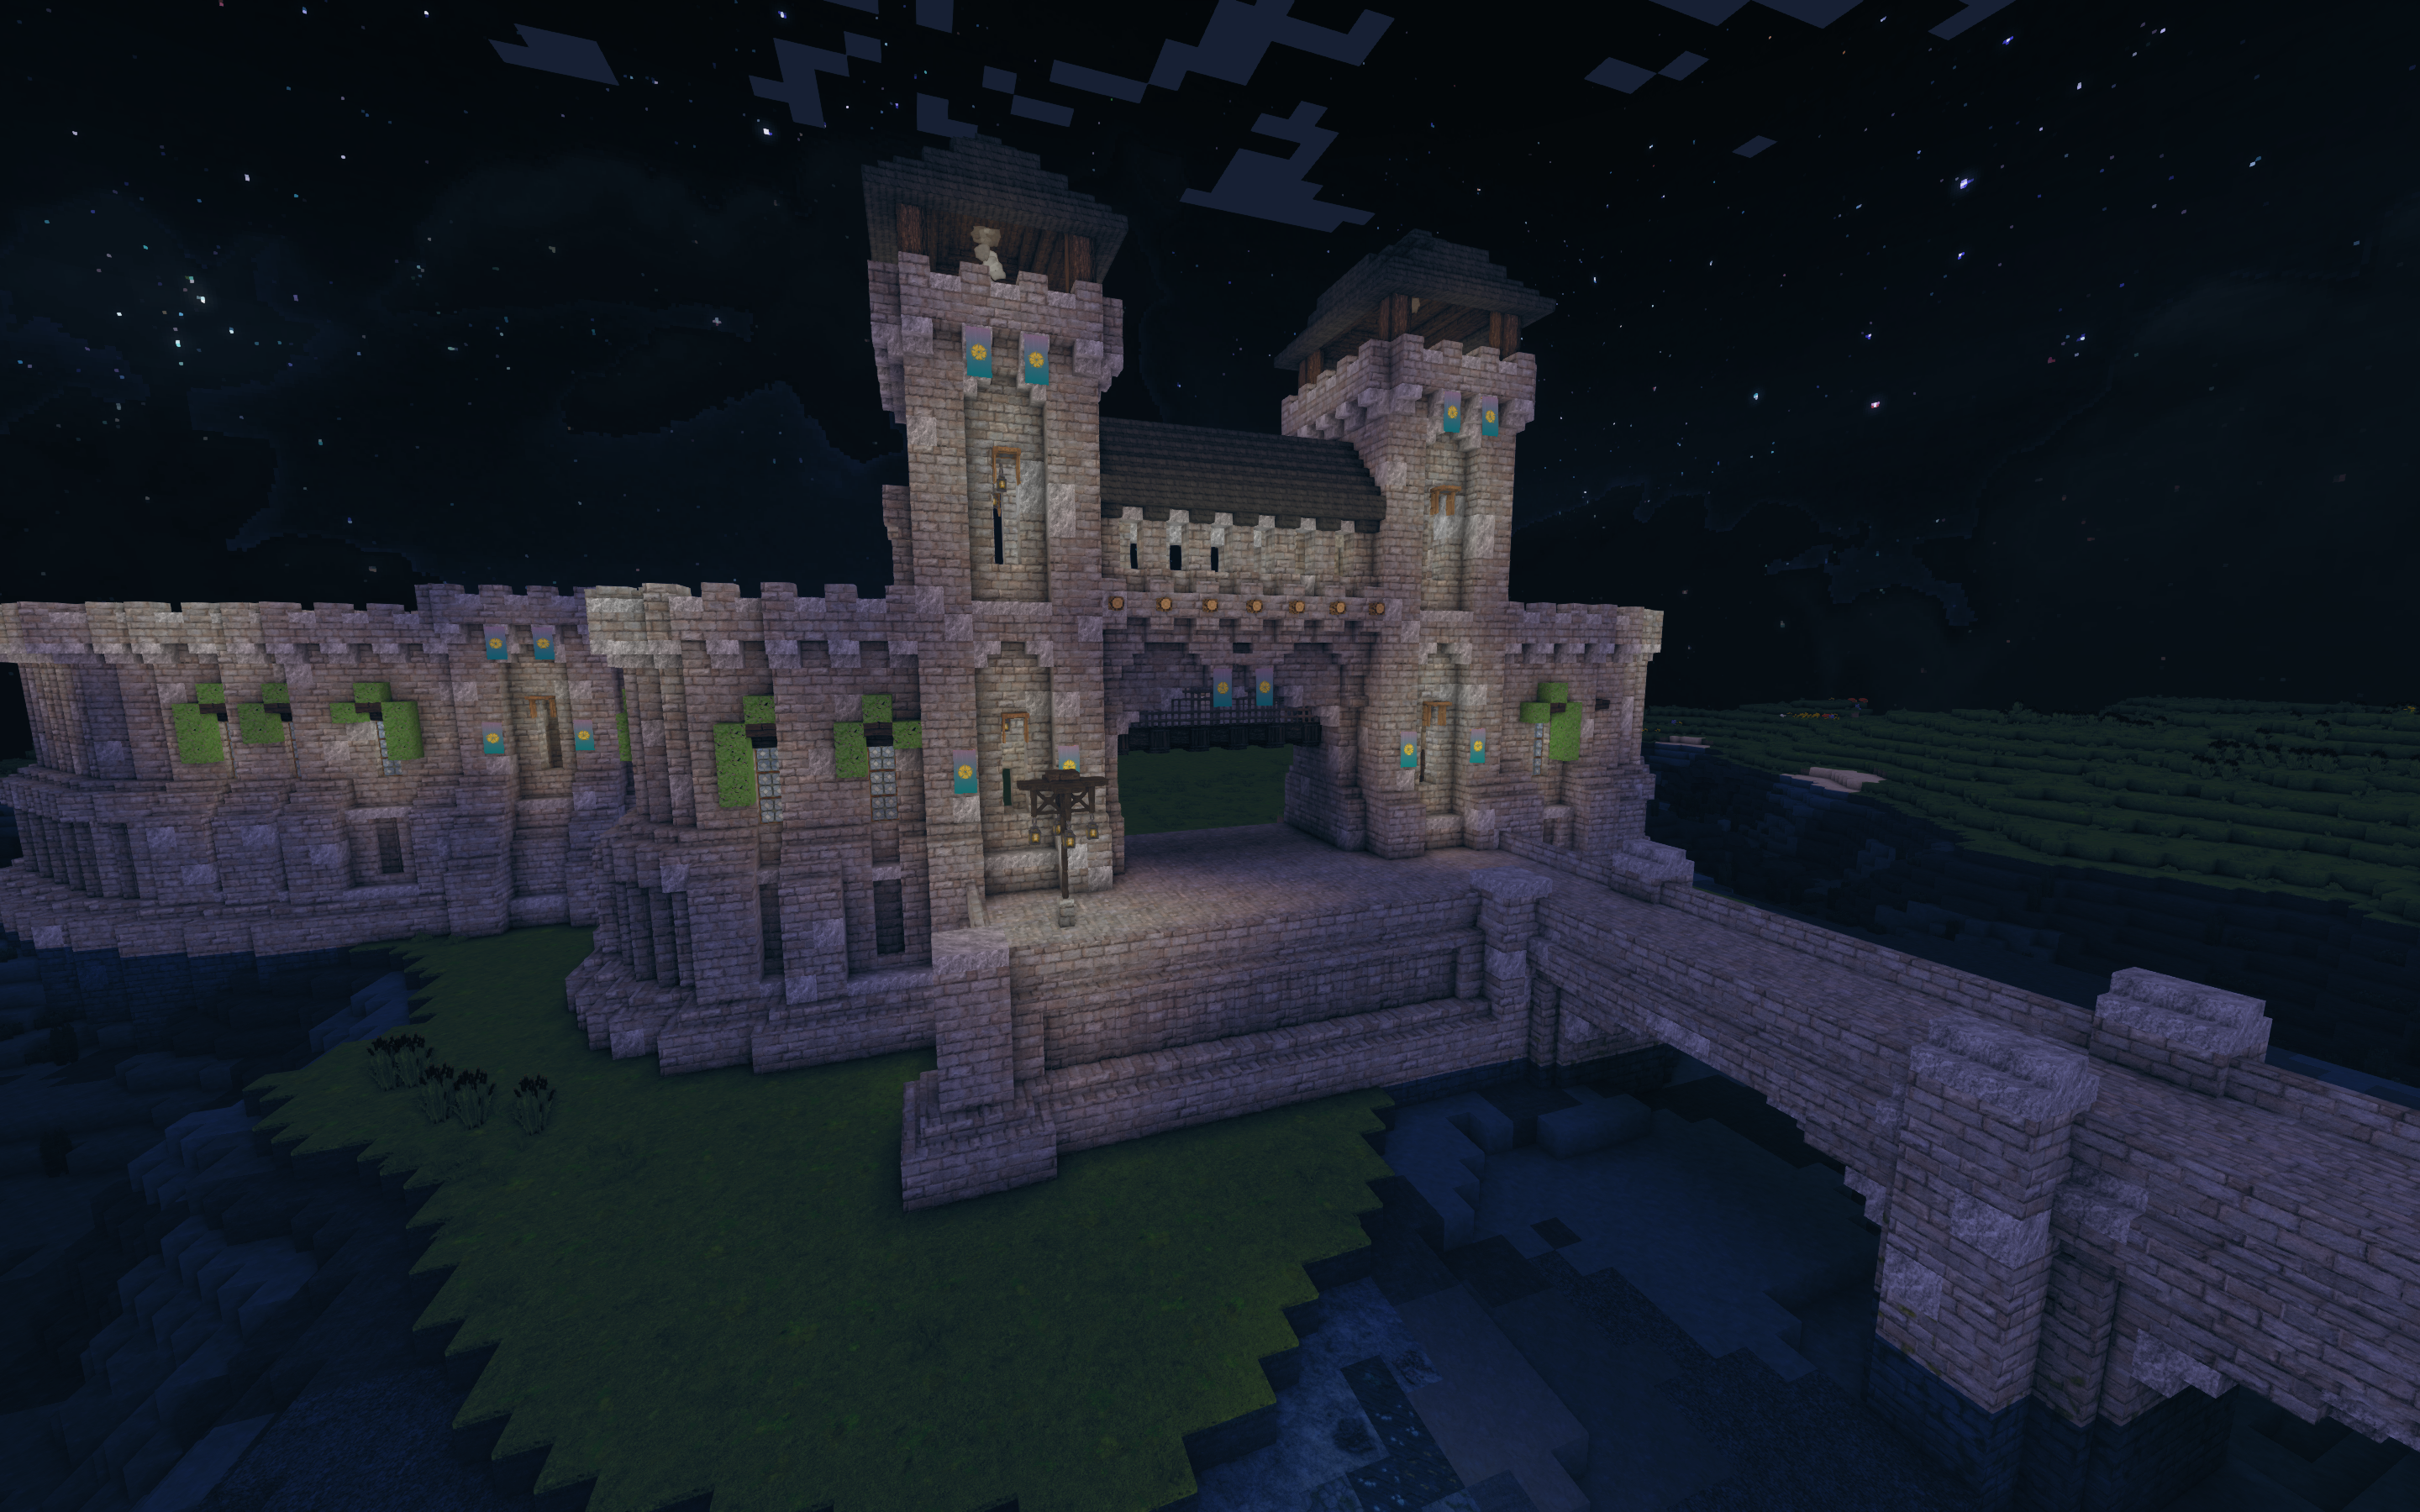 An arial view of the castle wall entrance at night.